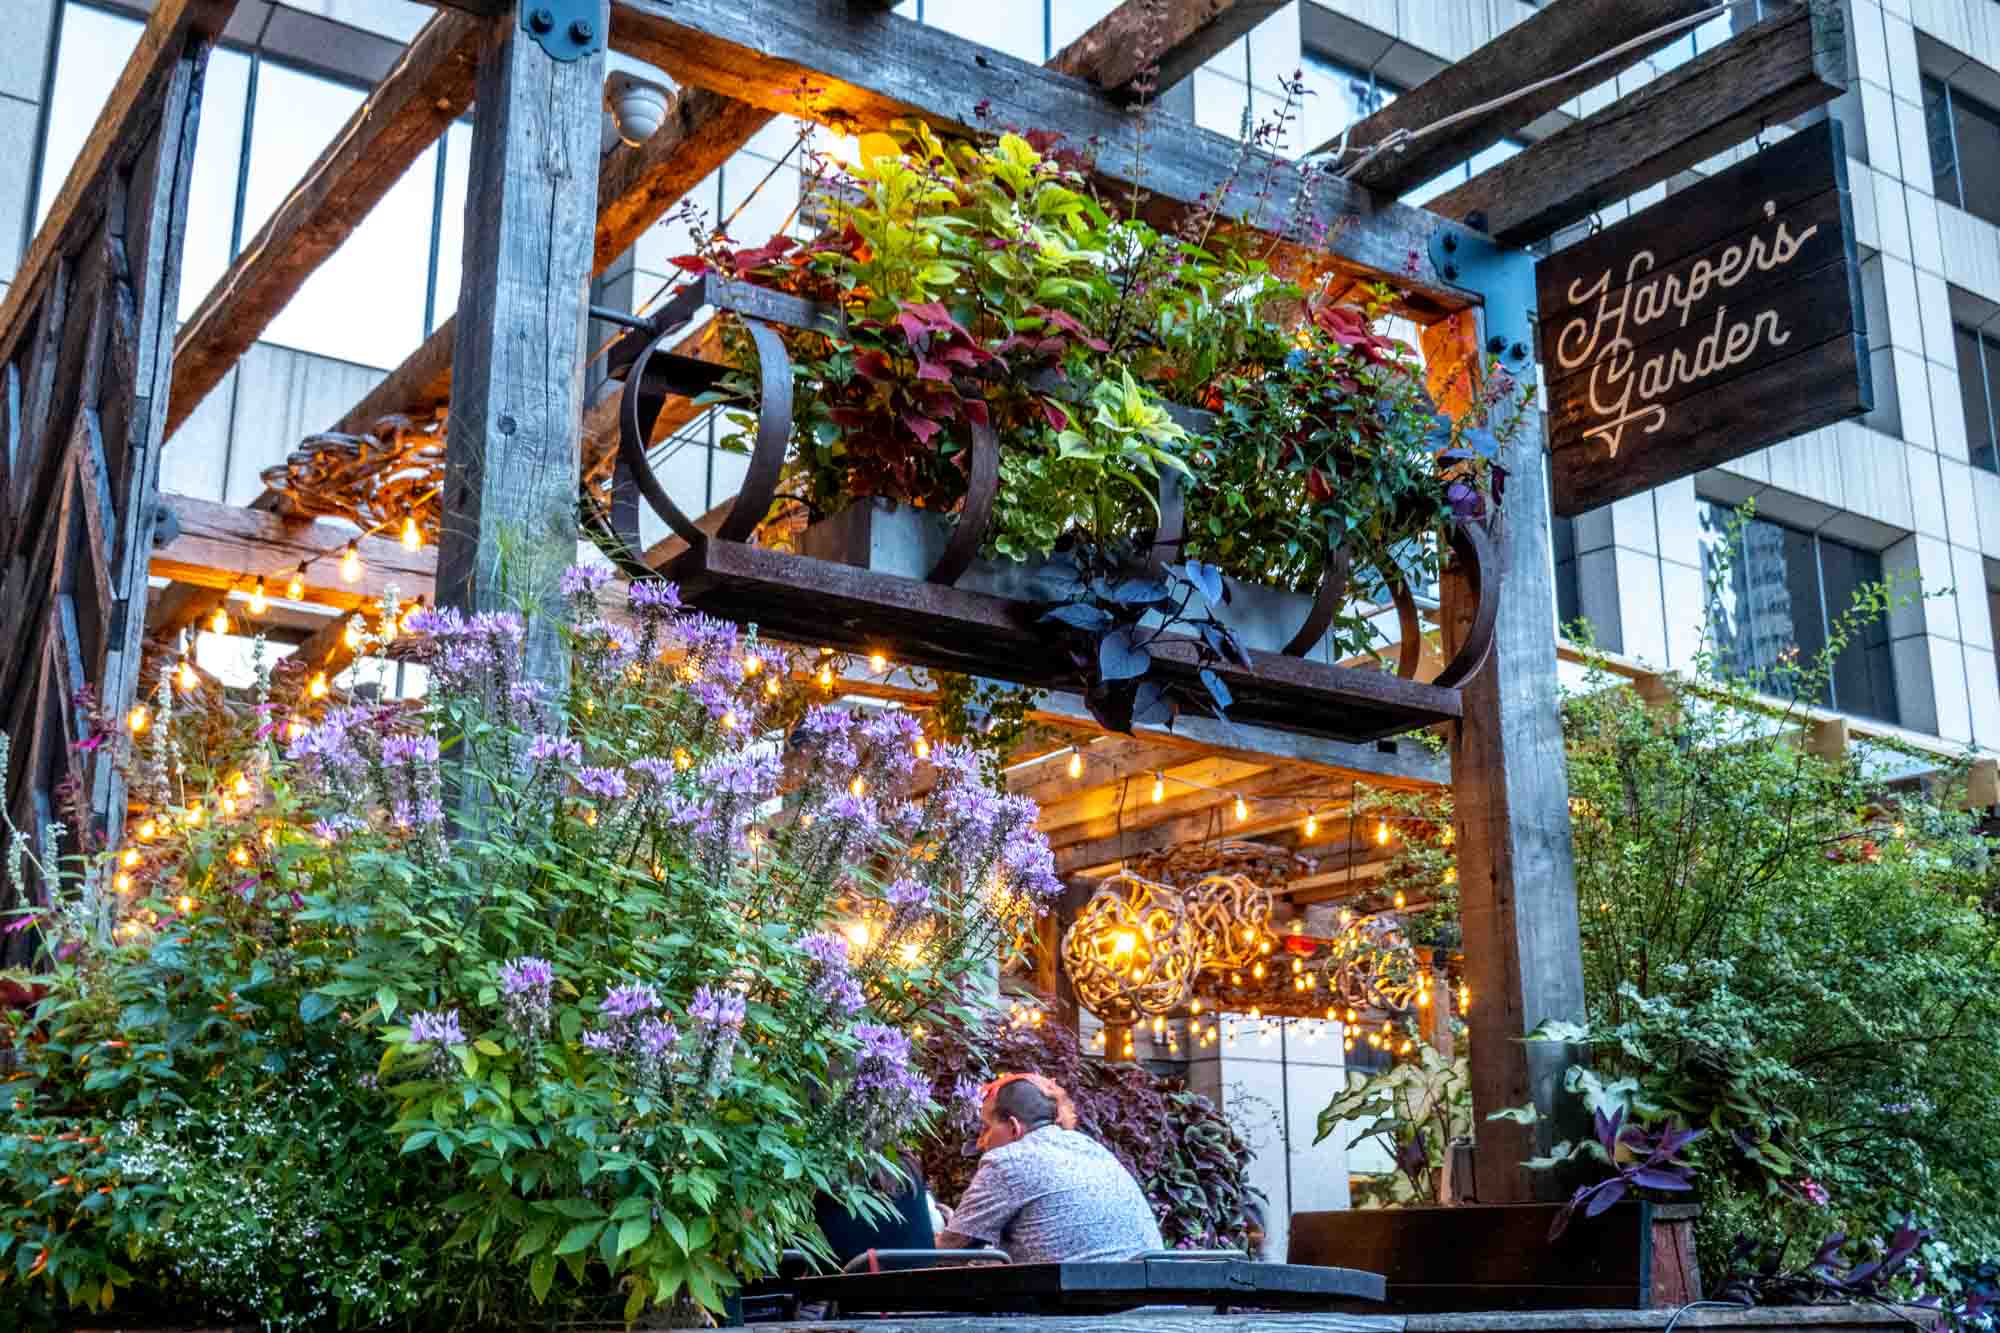 Restaurant patio full of plants and purple flowers with a sign for Harper's Garden